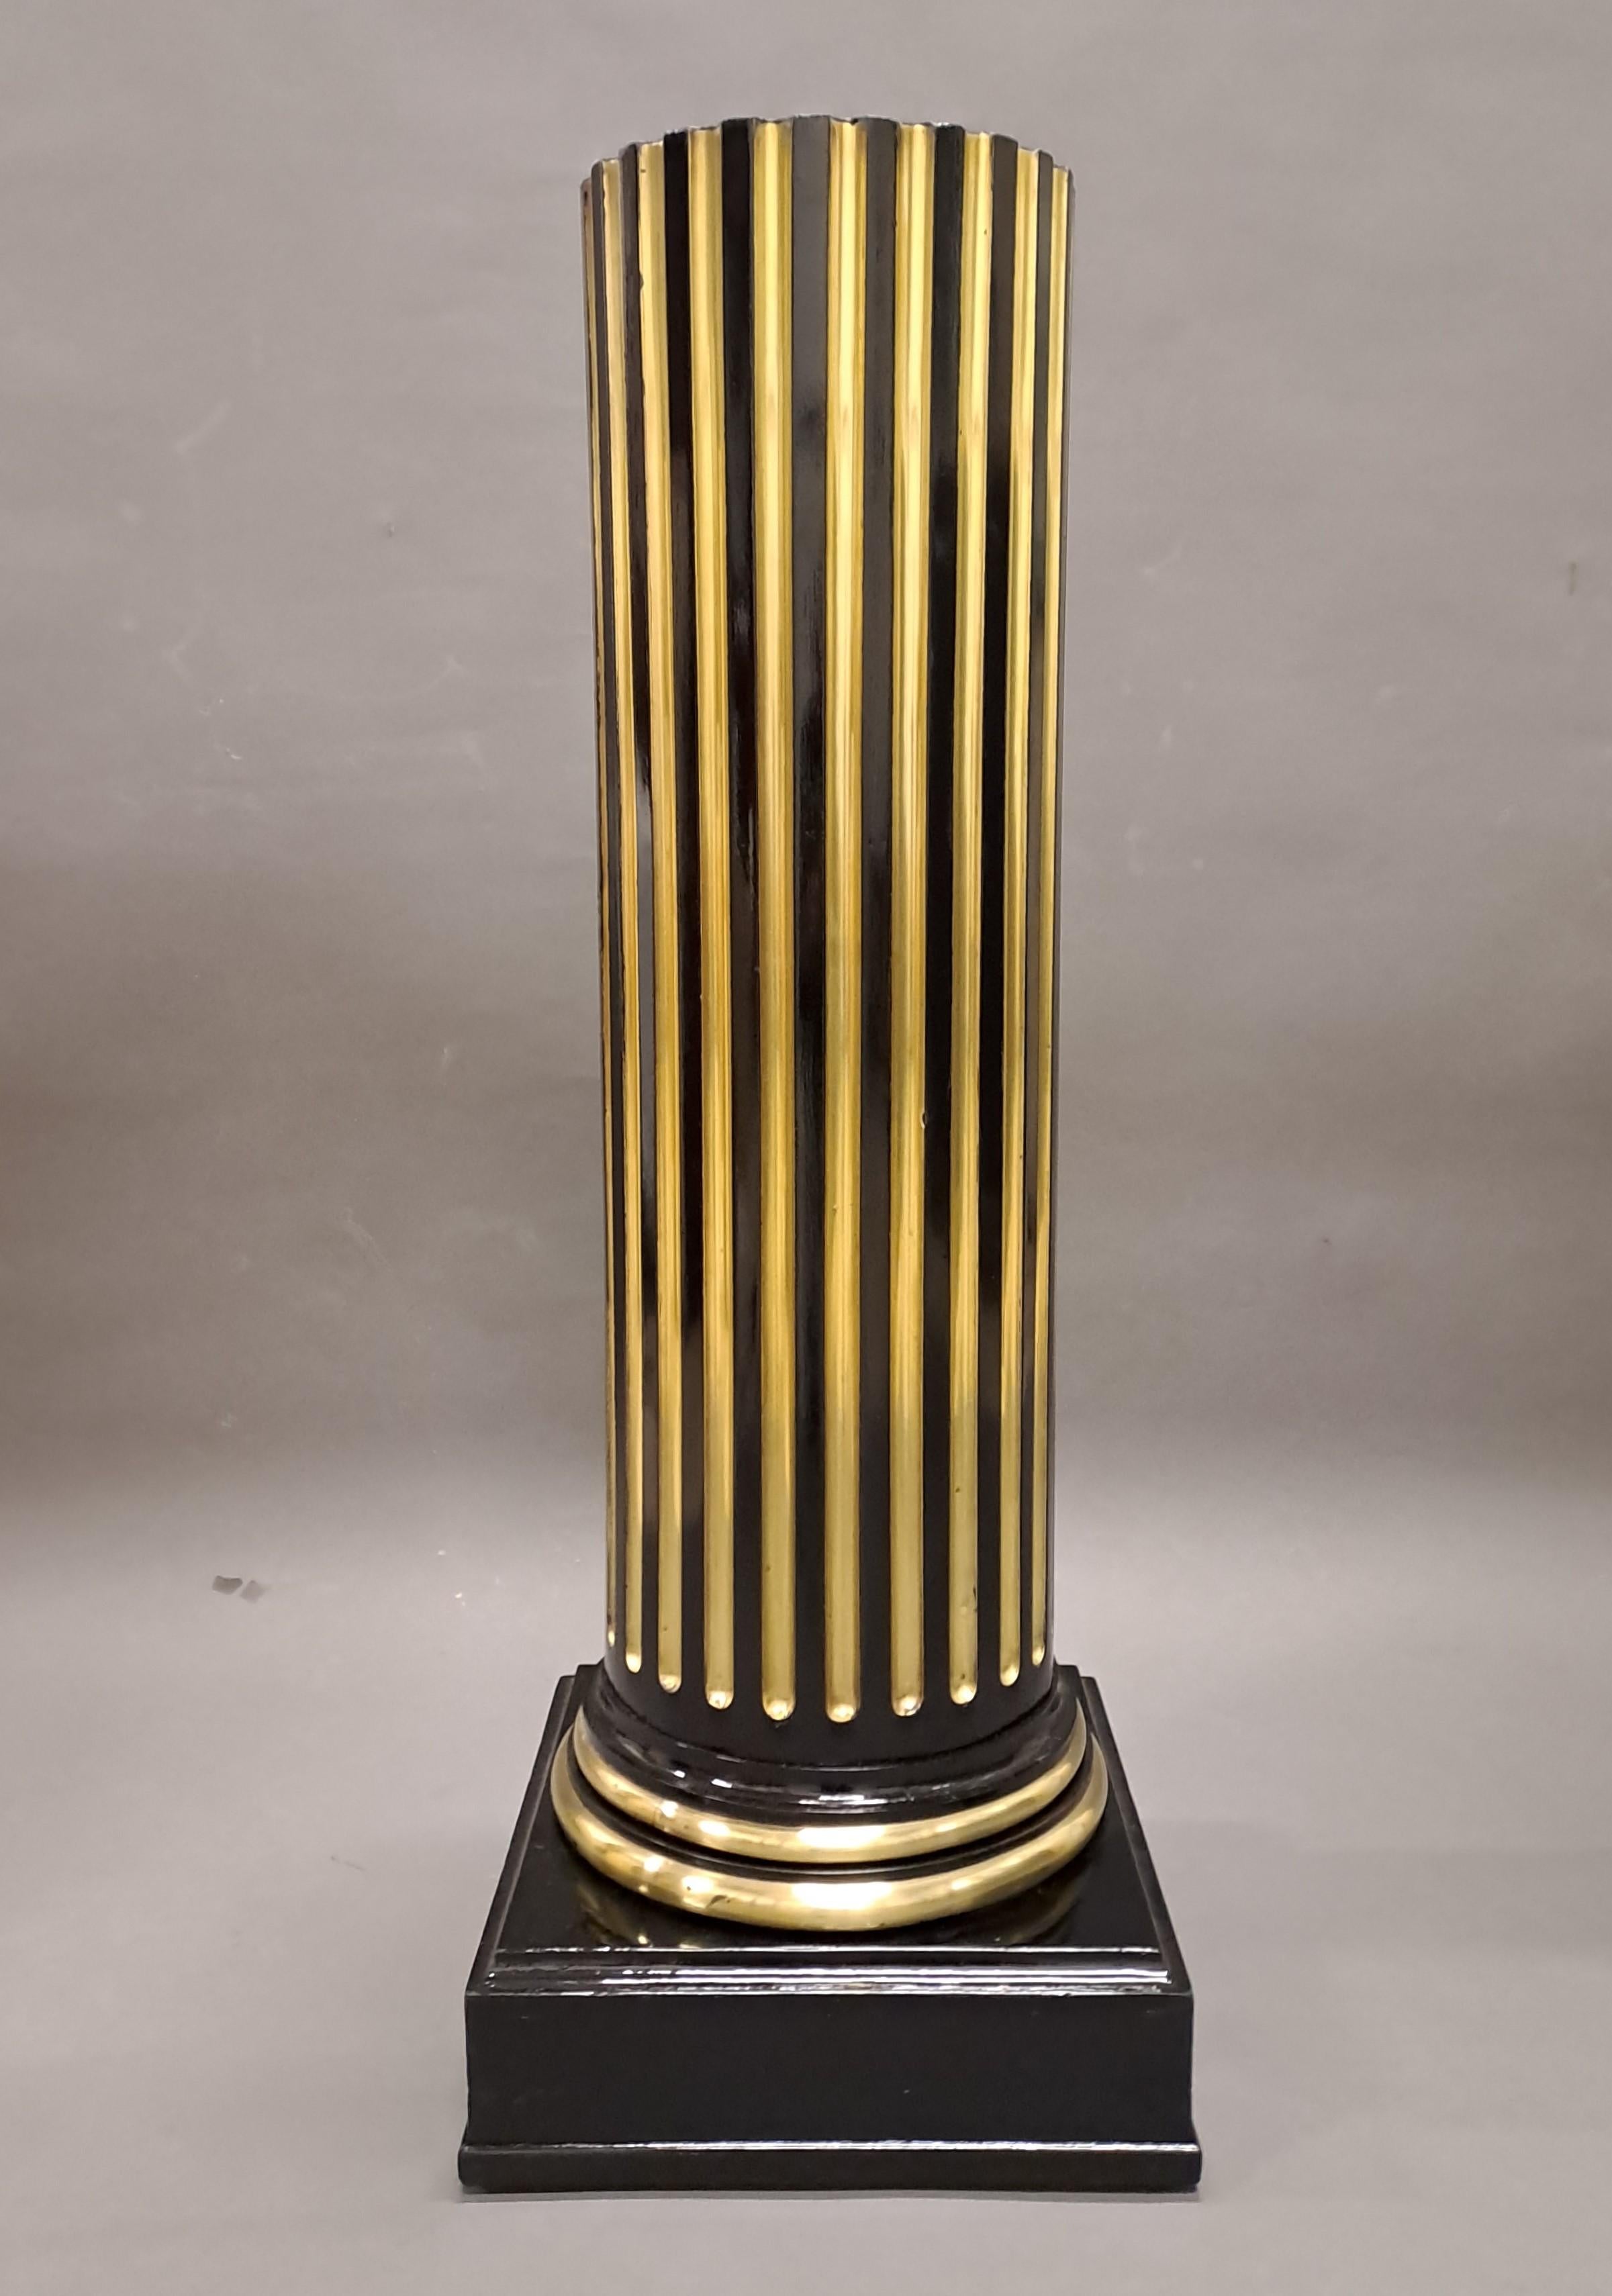 Rare and important Napoleon III column. The barrel is decorated with gilded brass grooves, at its base two rings also in gilded brass.

French work from the Napoleon III period

Ideal for completing a Napoleon III decor and highlighting your most